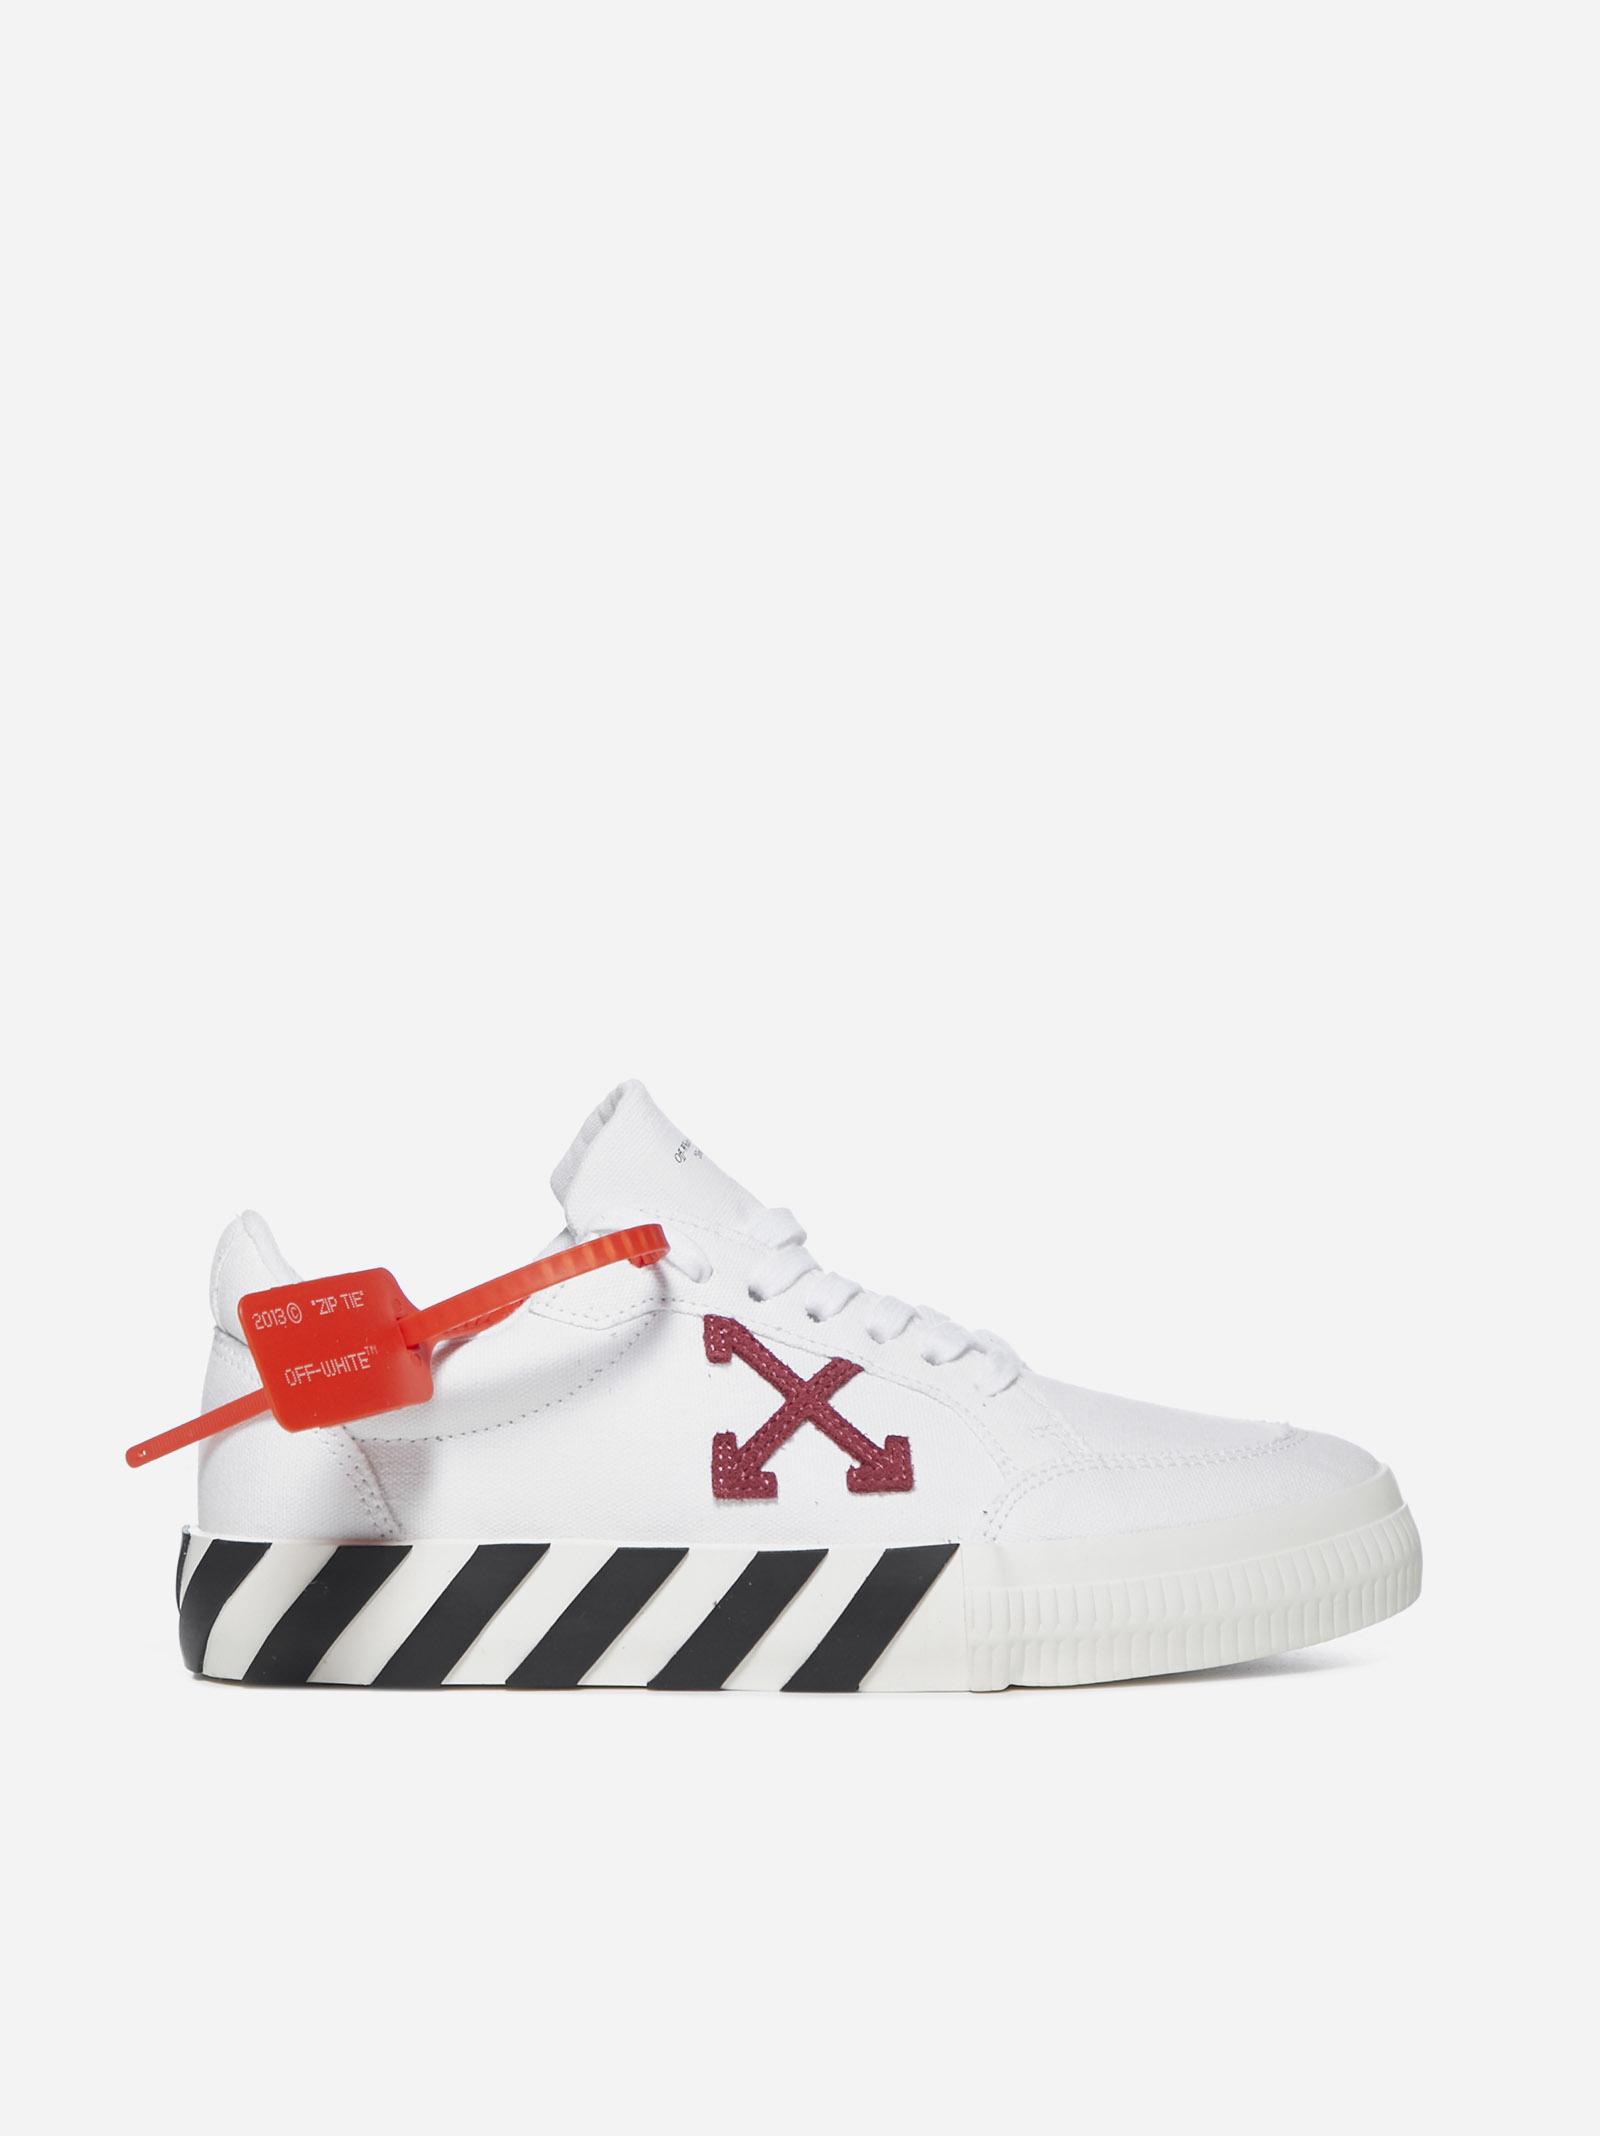 Off-White c/o Virgil Abloh Low Vulcanized Canvas Sneakers in White ...